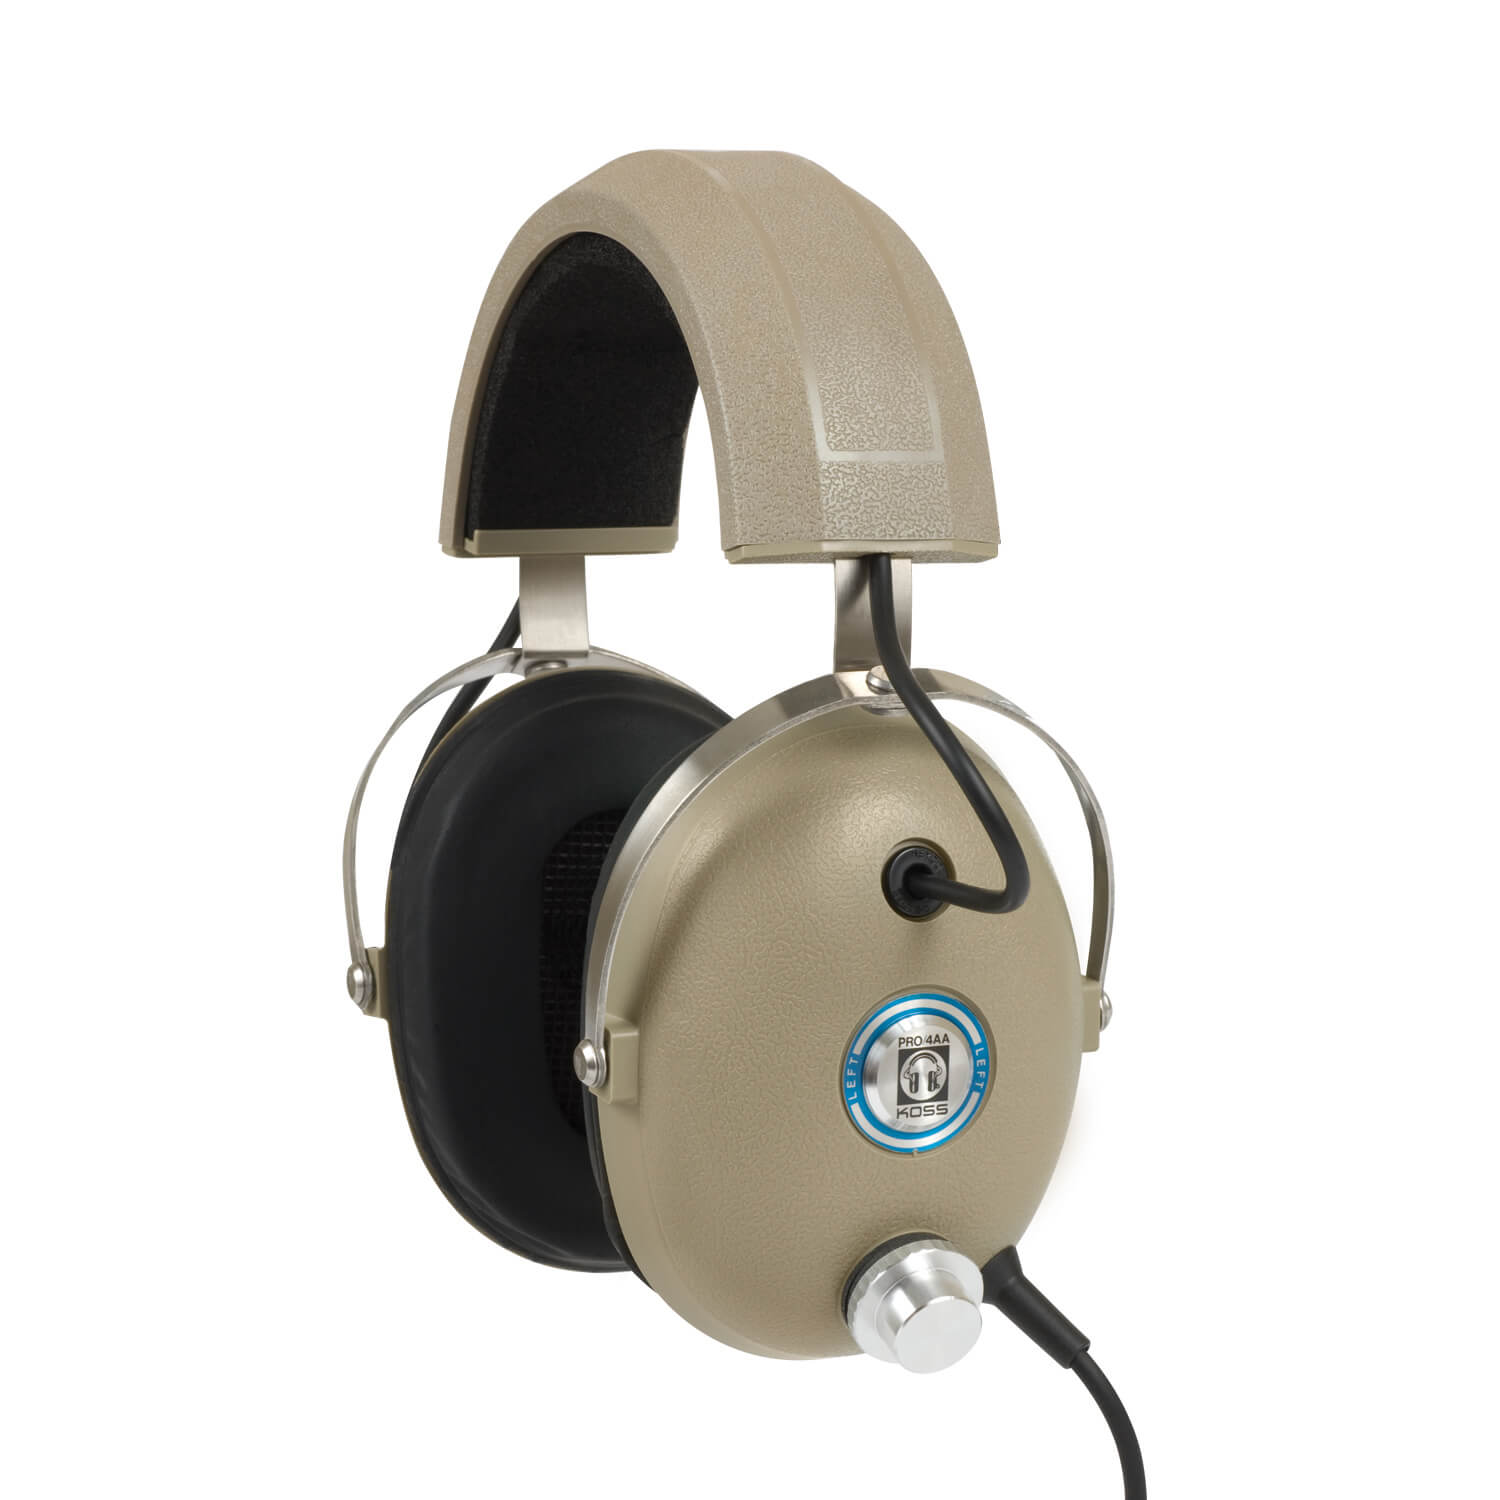 Stereo OverEar Headphones Pro 4AA, Anthracite/Silver